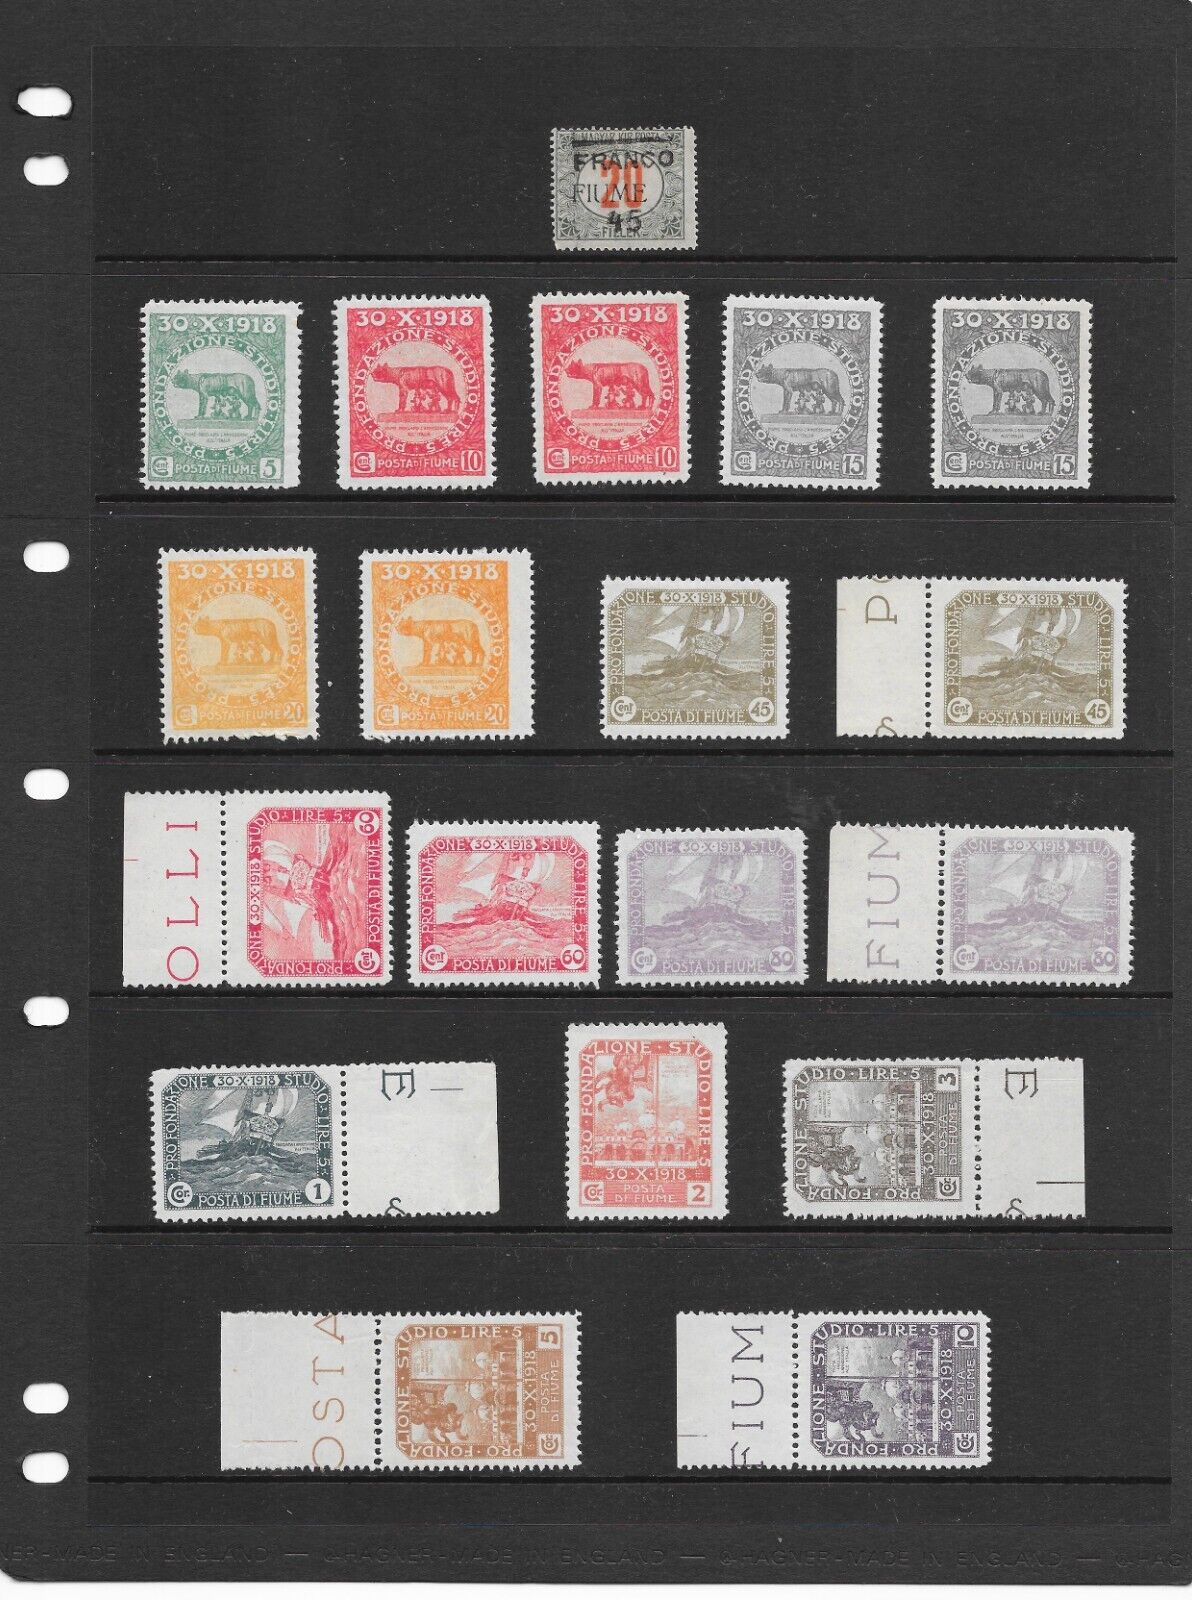 ITALYFIUME 191819 18 stamps MNH 1 stamp postage due MH